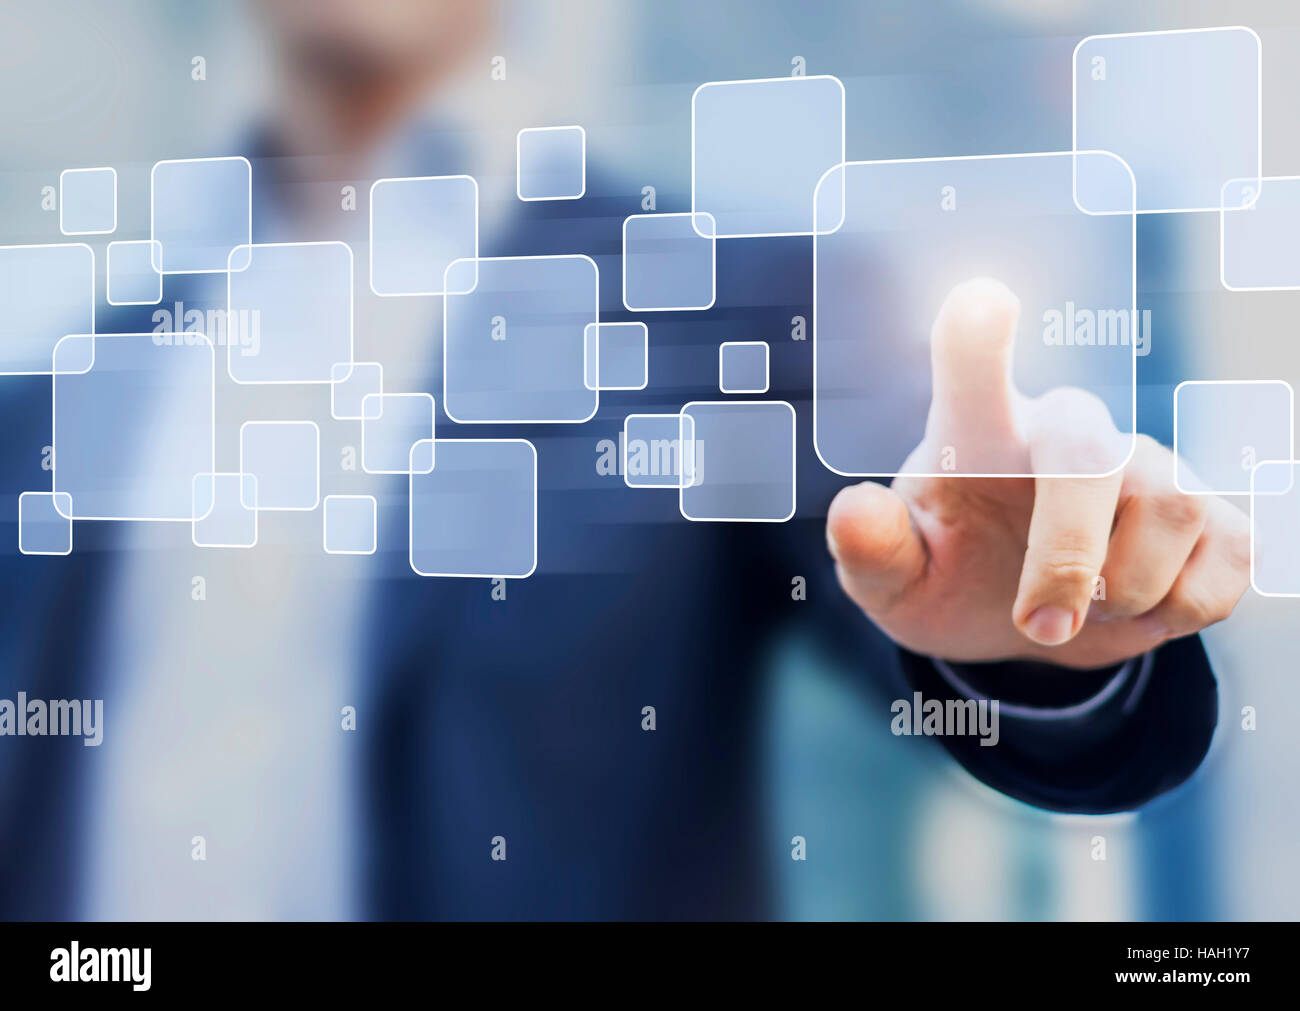 Abstract business concept, businessman touching a button on a virtual interface, technology Stock Photo